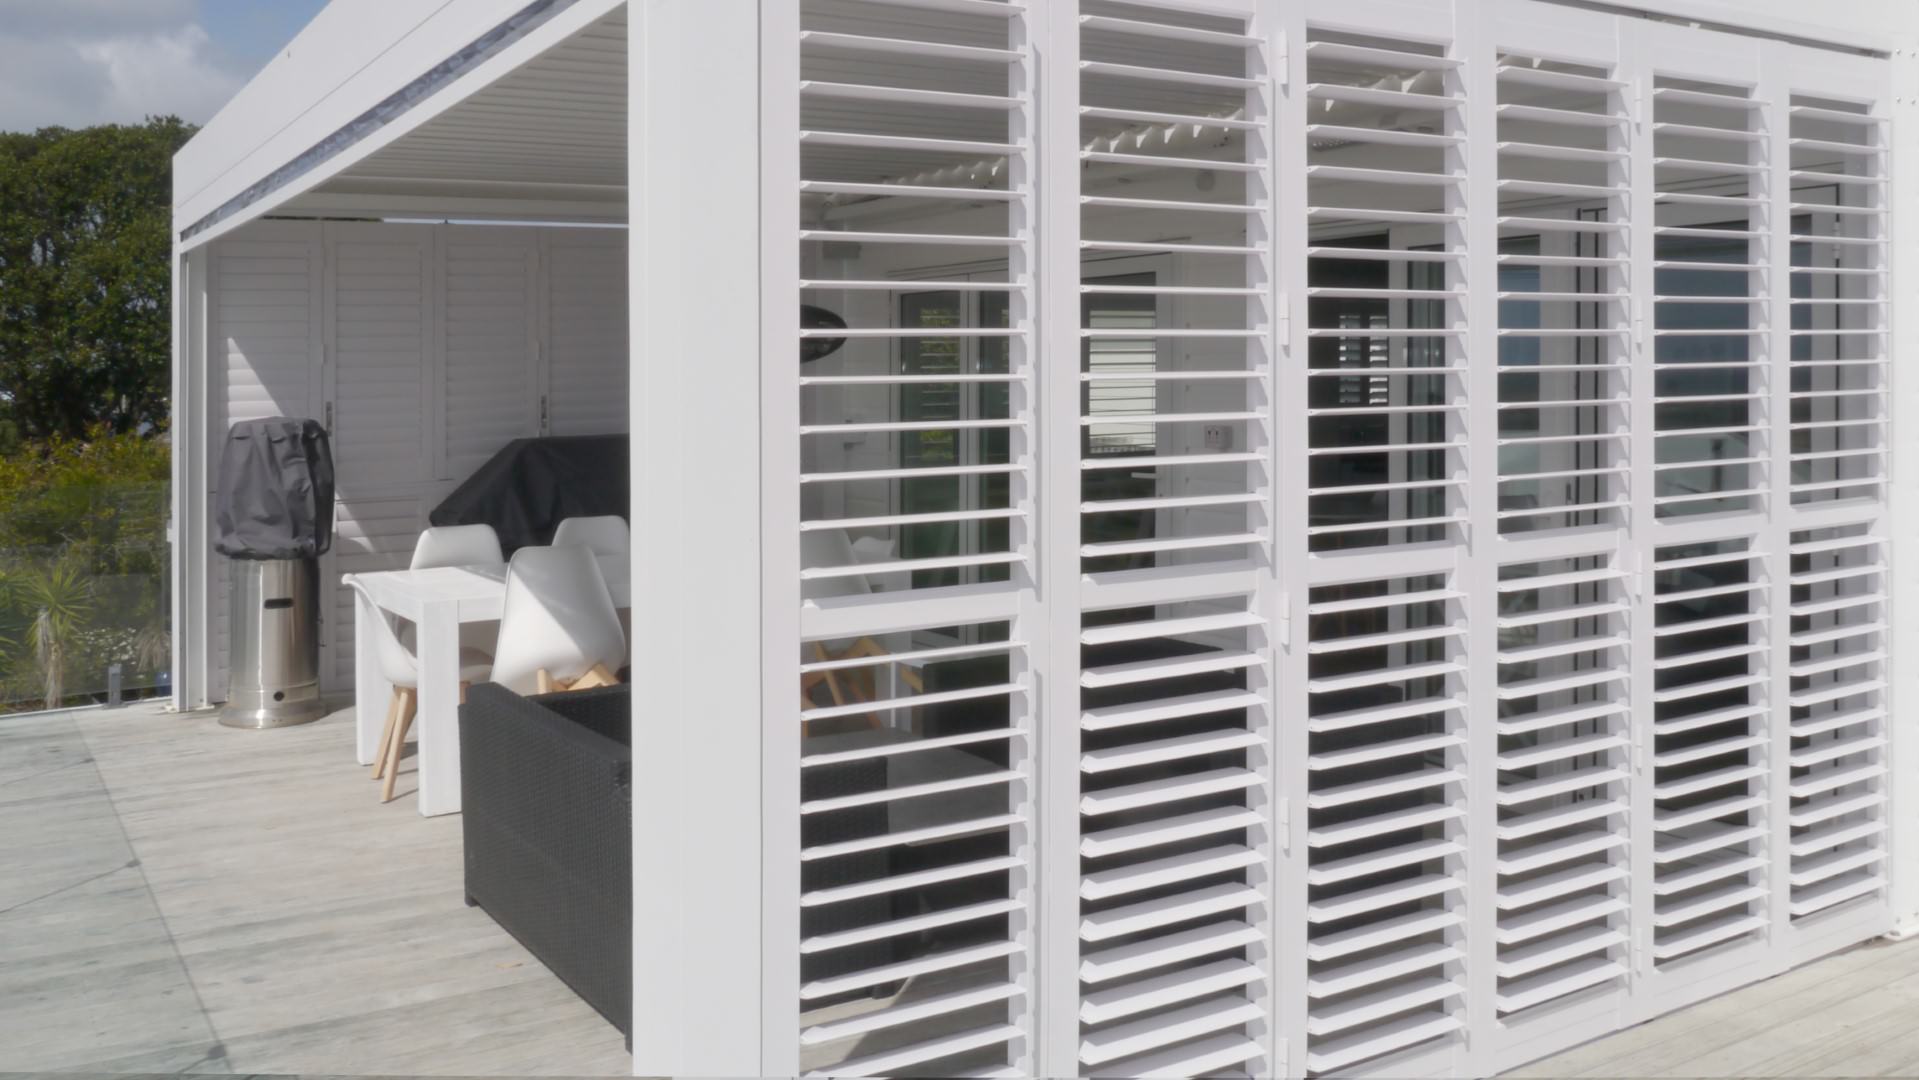 Plantation style patio blinds brighten outdoor space in Auckland home